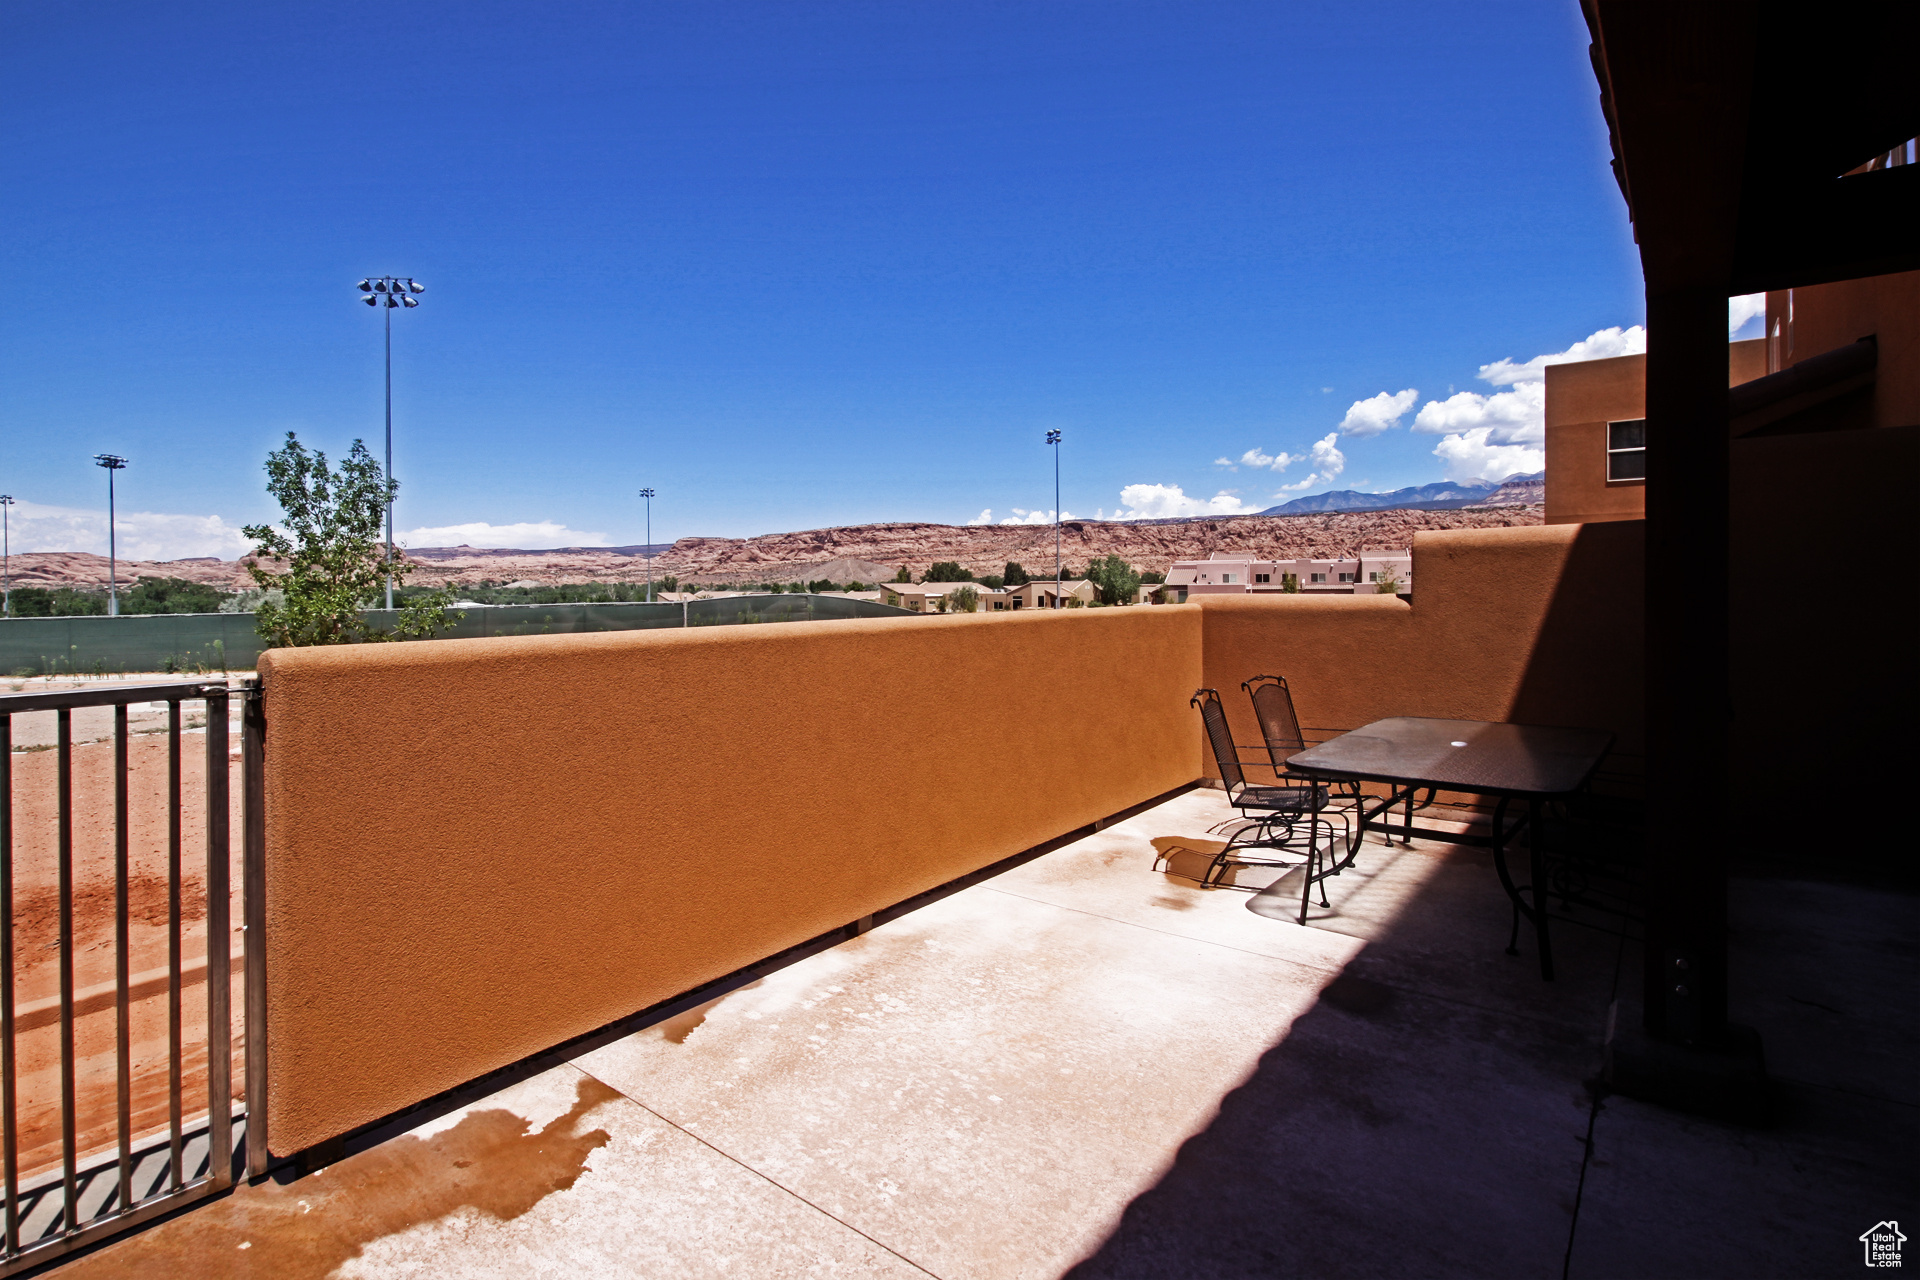 3853 S RED VALLEY #13A3, Moab, Utah 84532, 2 Bedrooms Bedrooms, 9 Rooms Rooms,2 BathroomsBathrooms,Residential,For sale,RED VALLEY,1986585